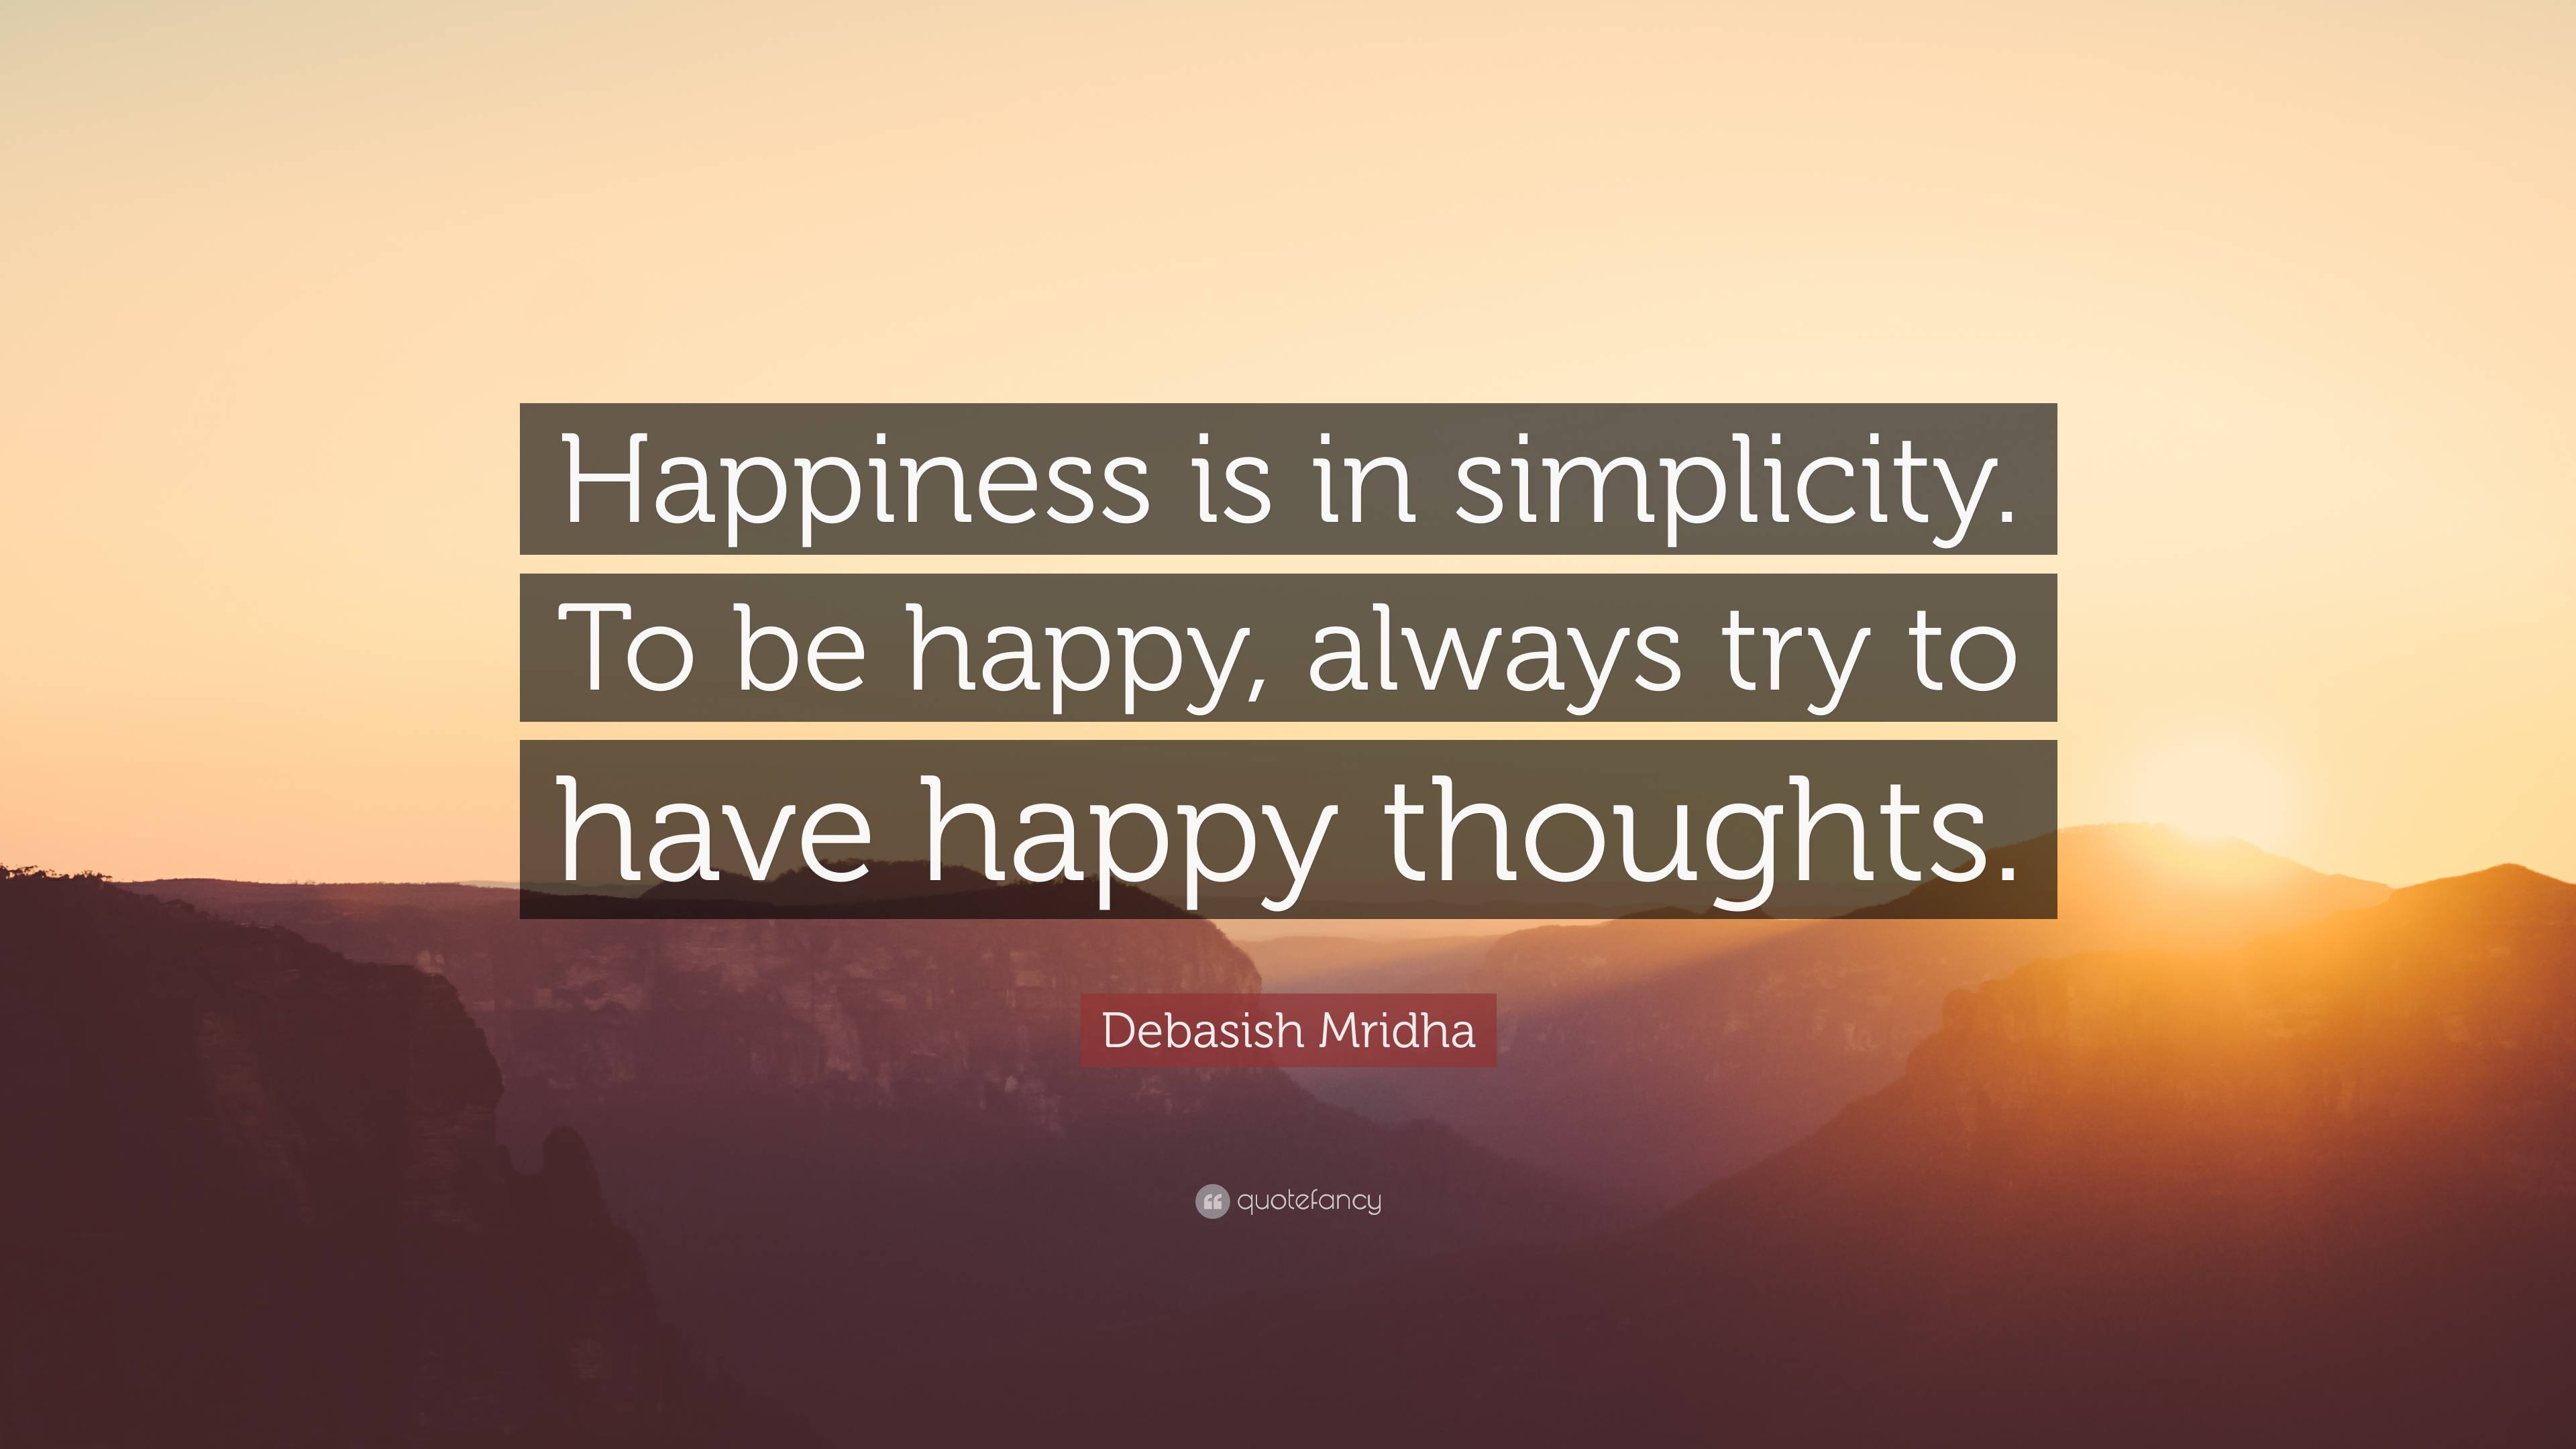 Debasish Mridha Quote: “Happiness is in simplicity. To be happy, always ...